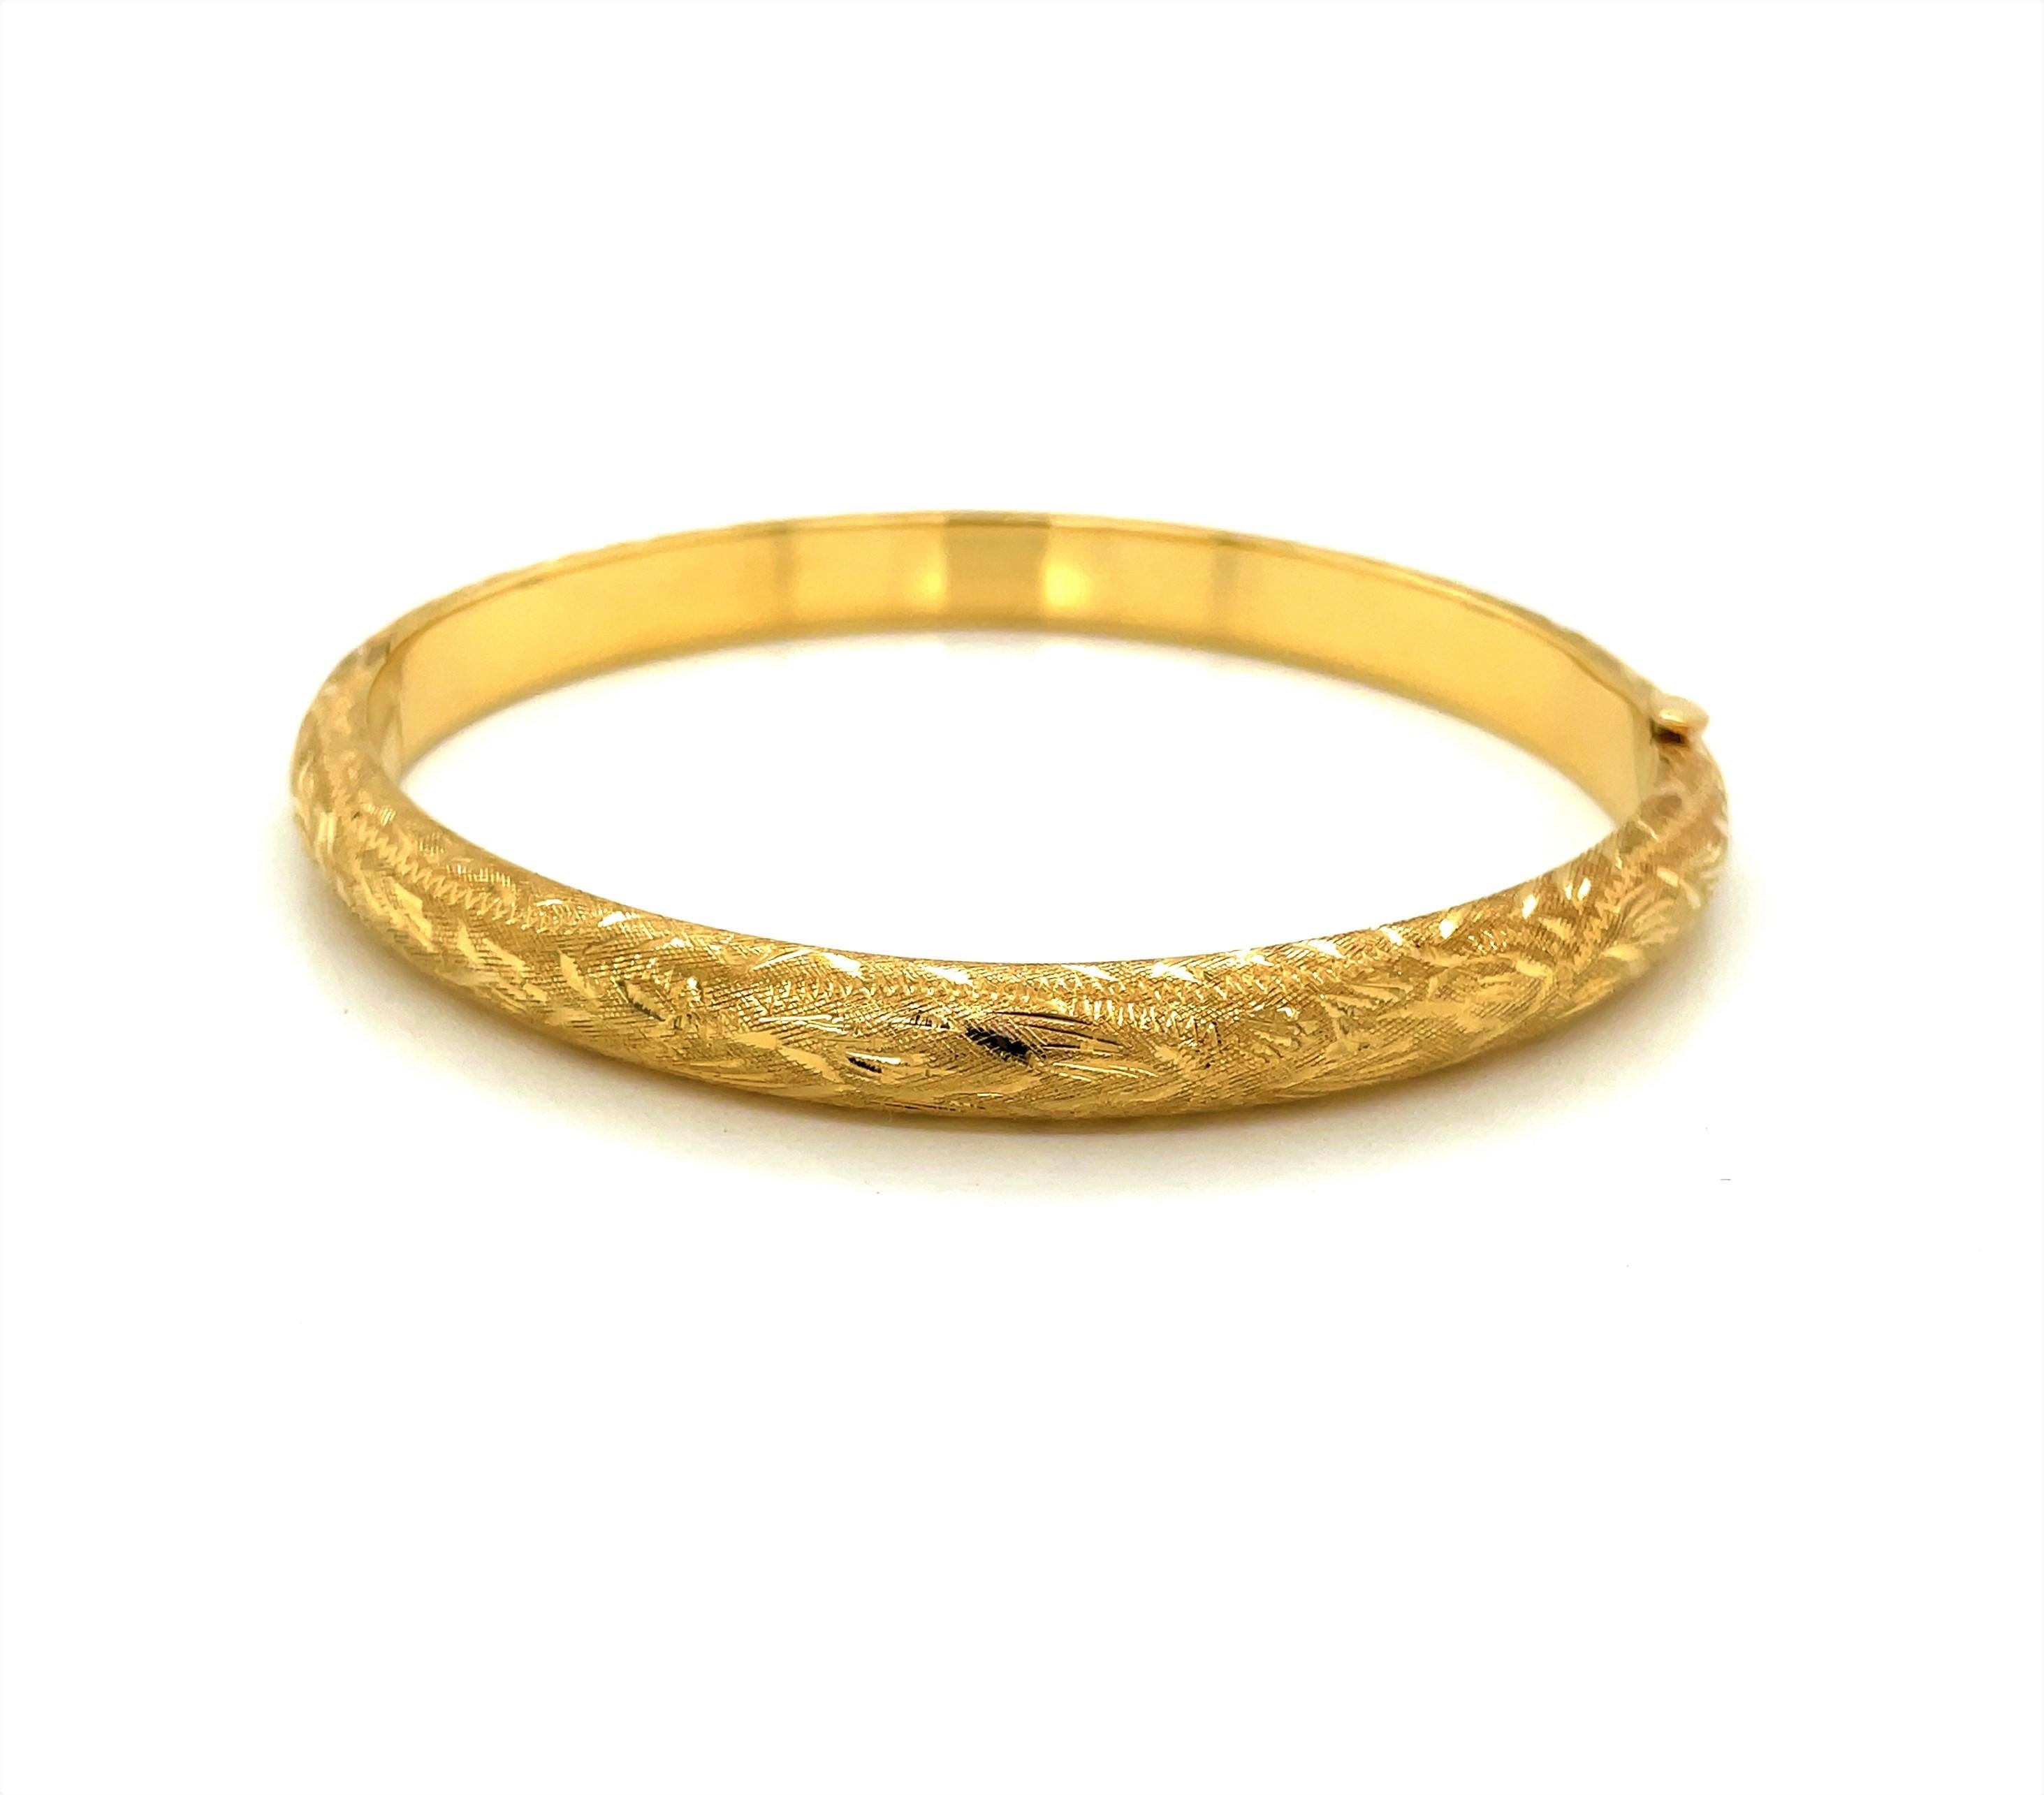 Perfect for every occasion, this essential 14 karat yellow gold bangle bracelet can be worn as a stand alone piece or perhaps stacked to complement other favorites from your jewelry wardrobe. At a modest 6.6 mm width, the textured finished with its